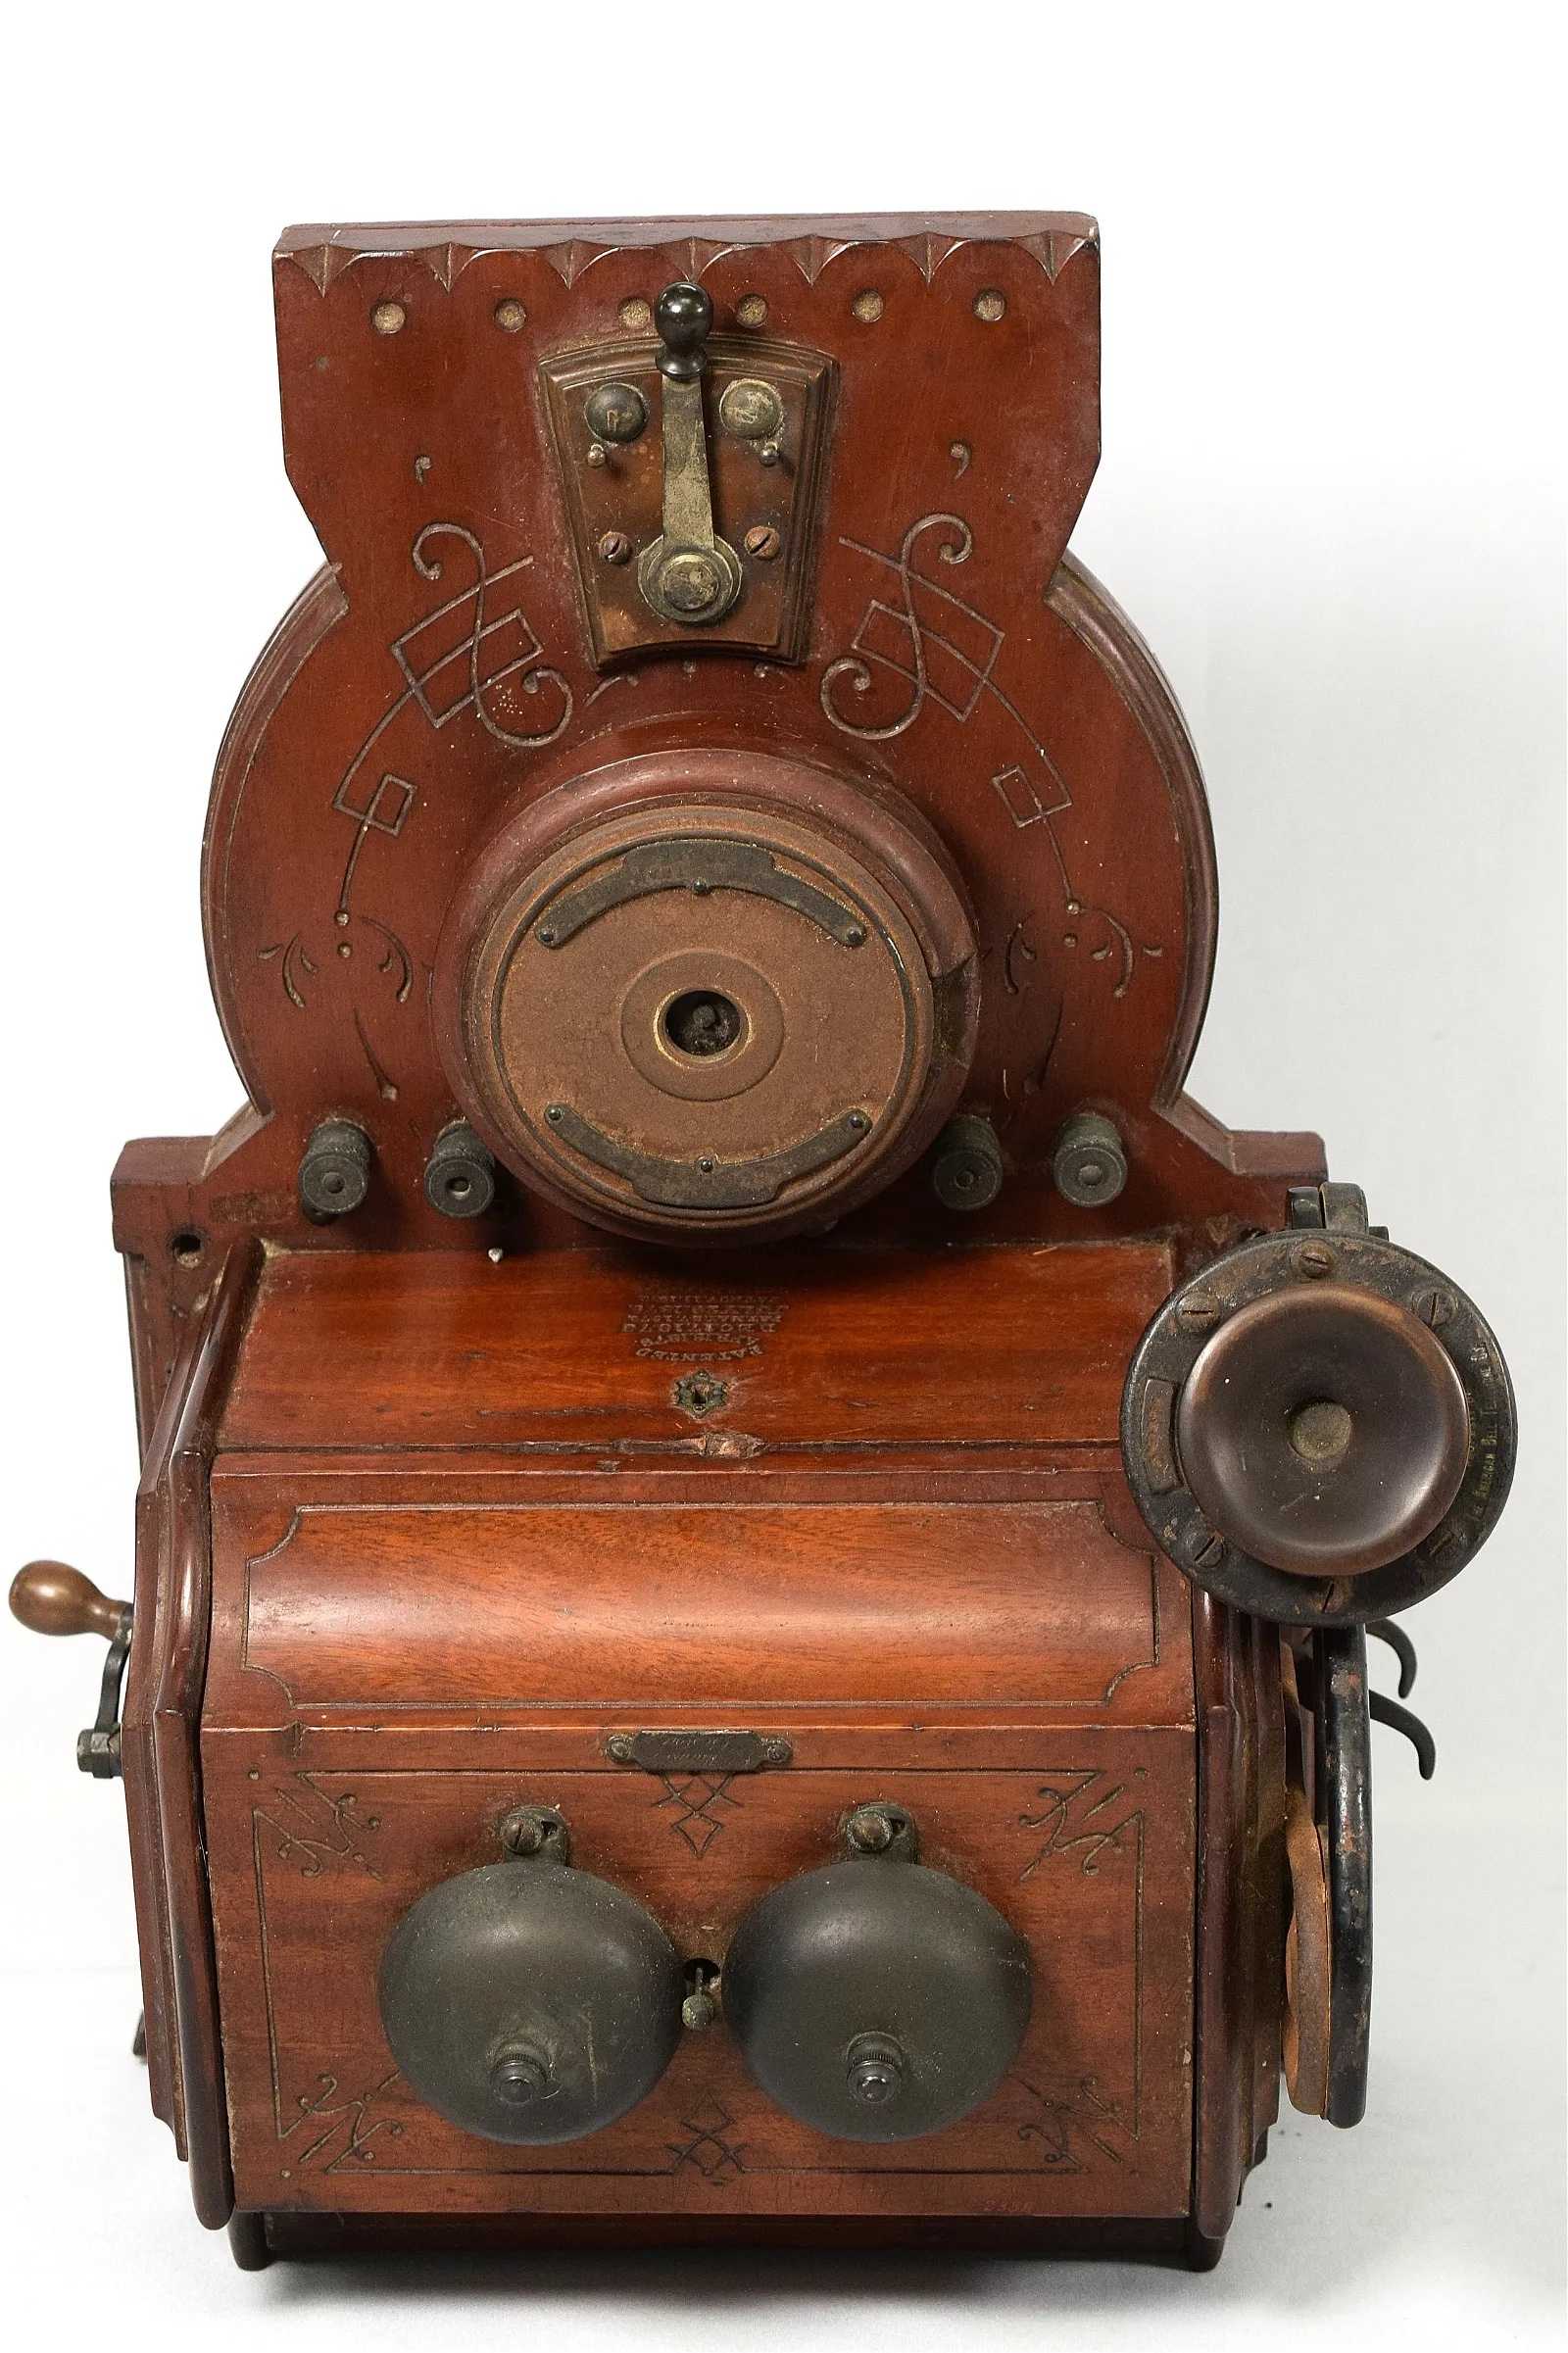 Charles Williams Telephone in Eastlake style, which sold for $35,000 ($44,450 with buyer’s premium) at White's Auctions.